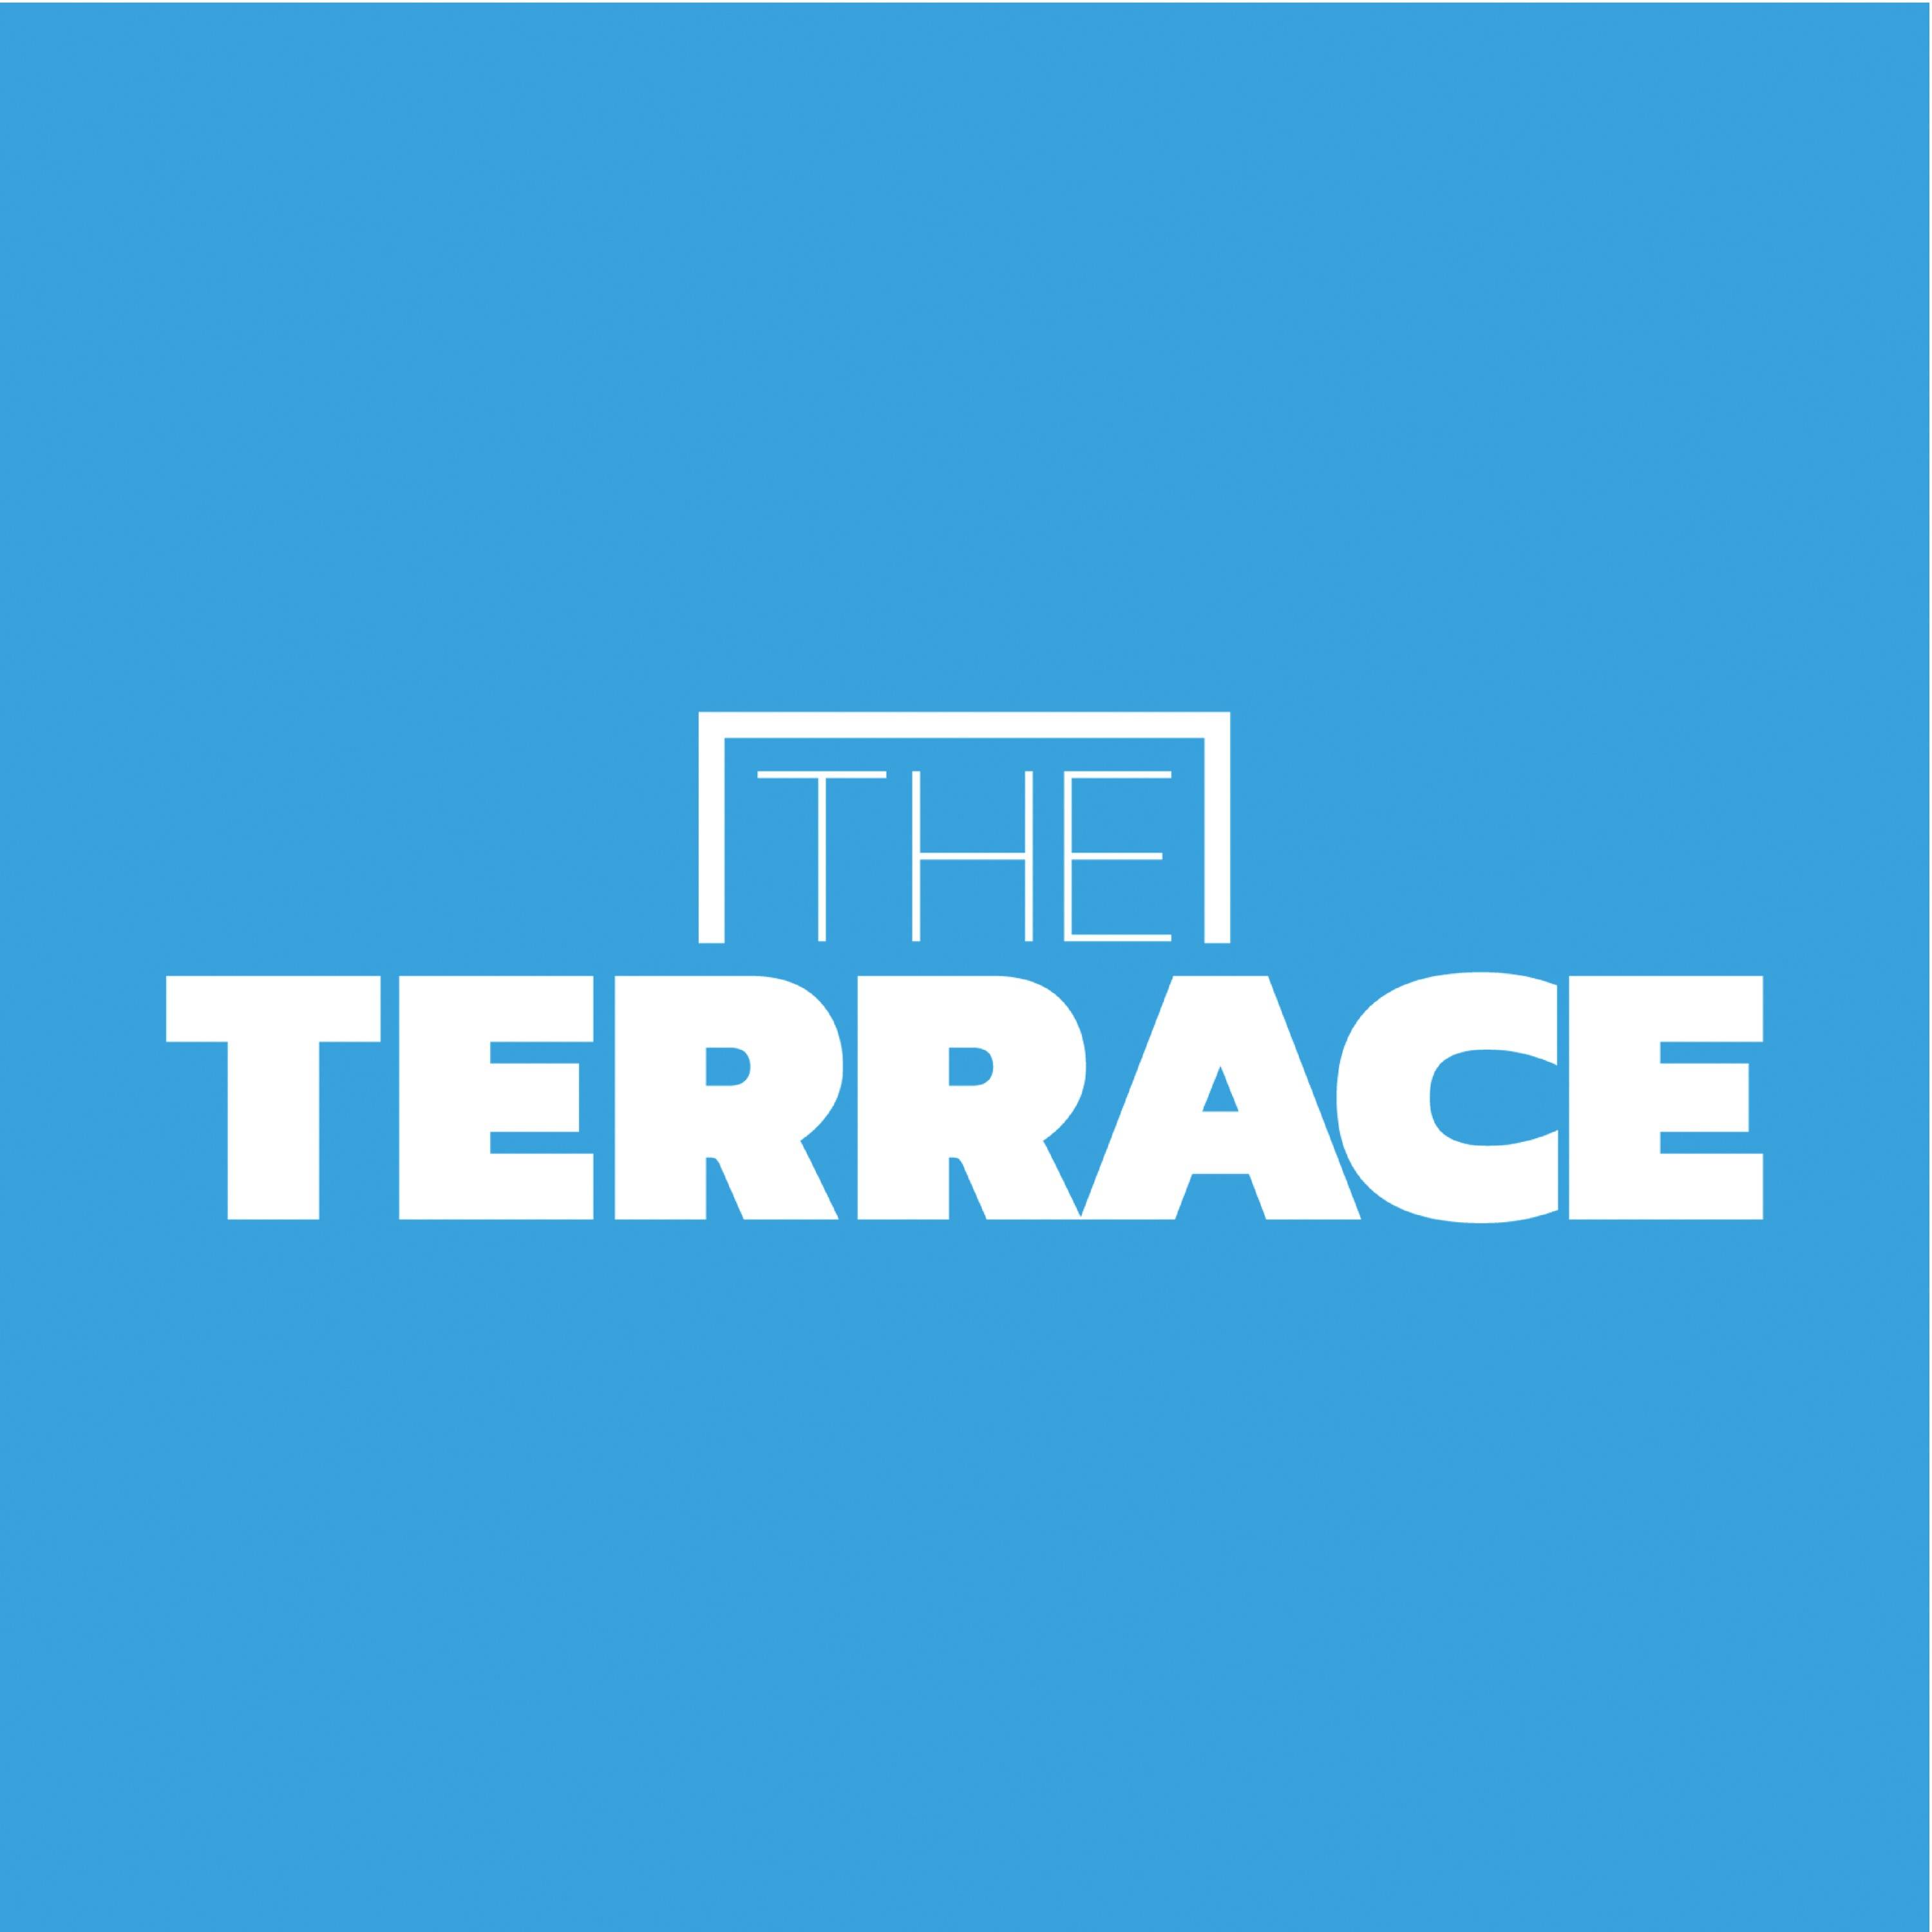 A special Terrace Podcast announcement